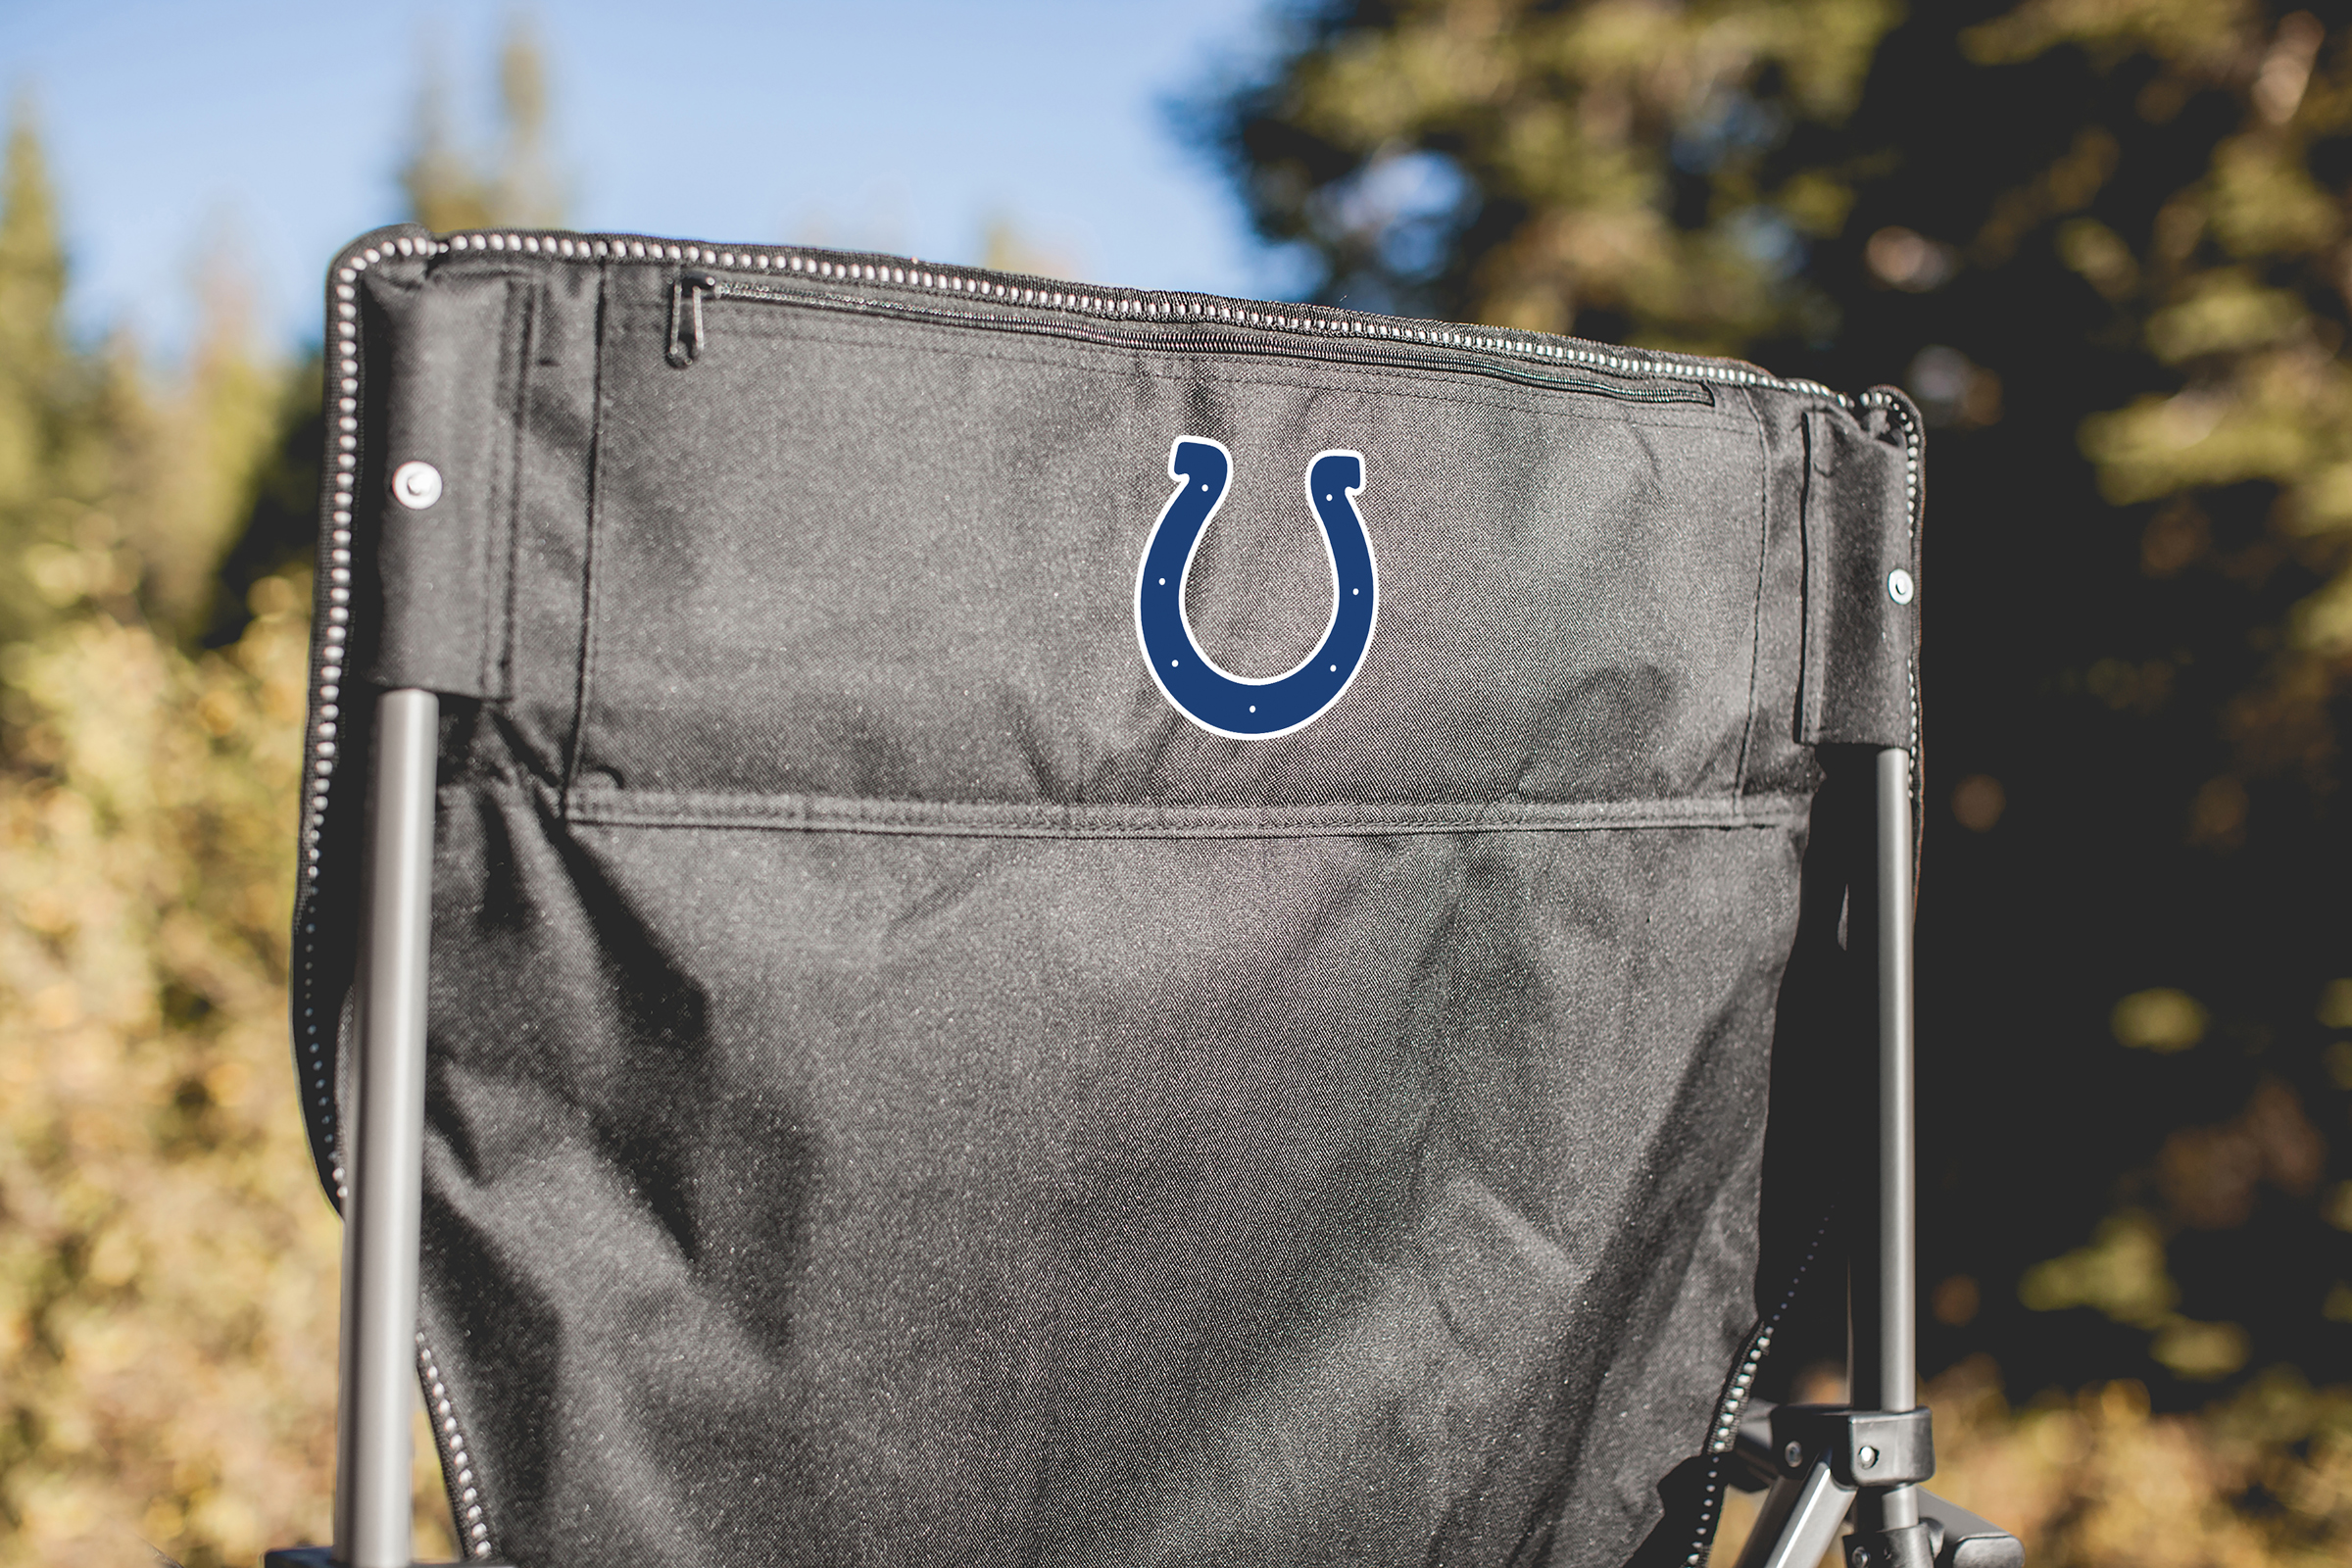 Indianapolis Colts - Outlander XL Camping Chair with Cooler